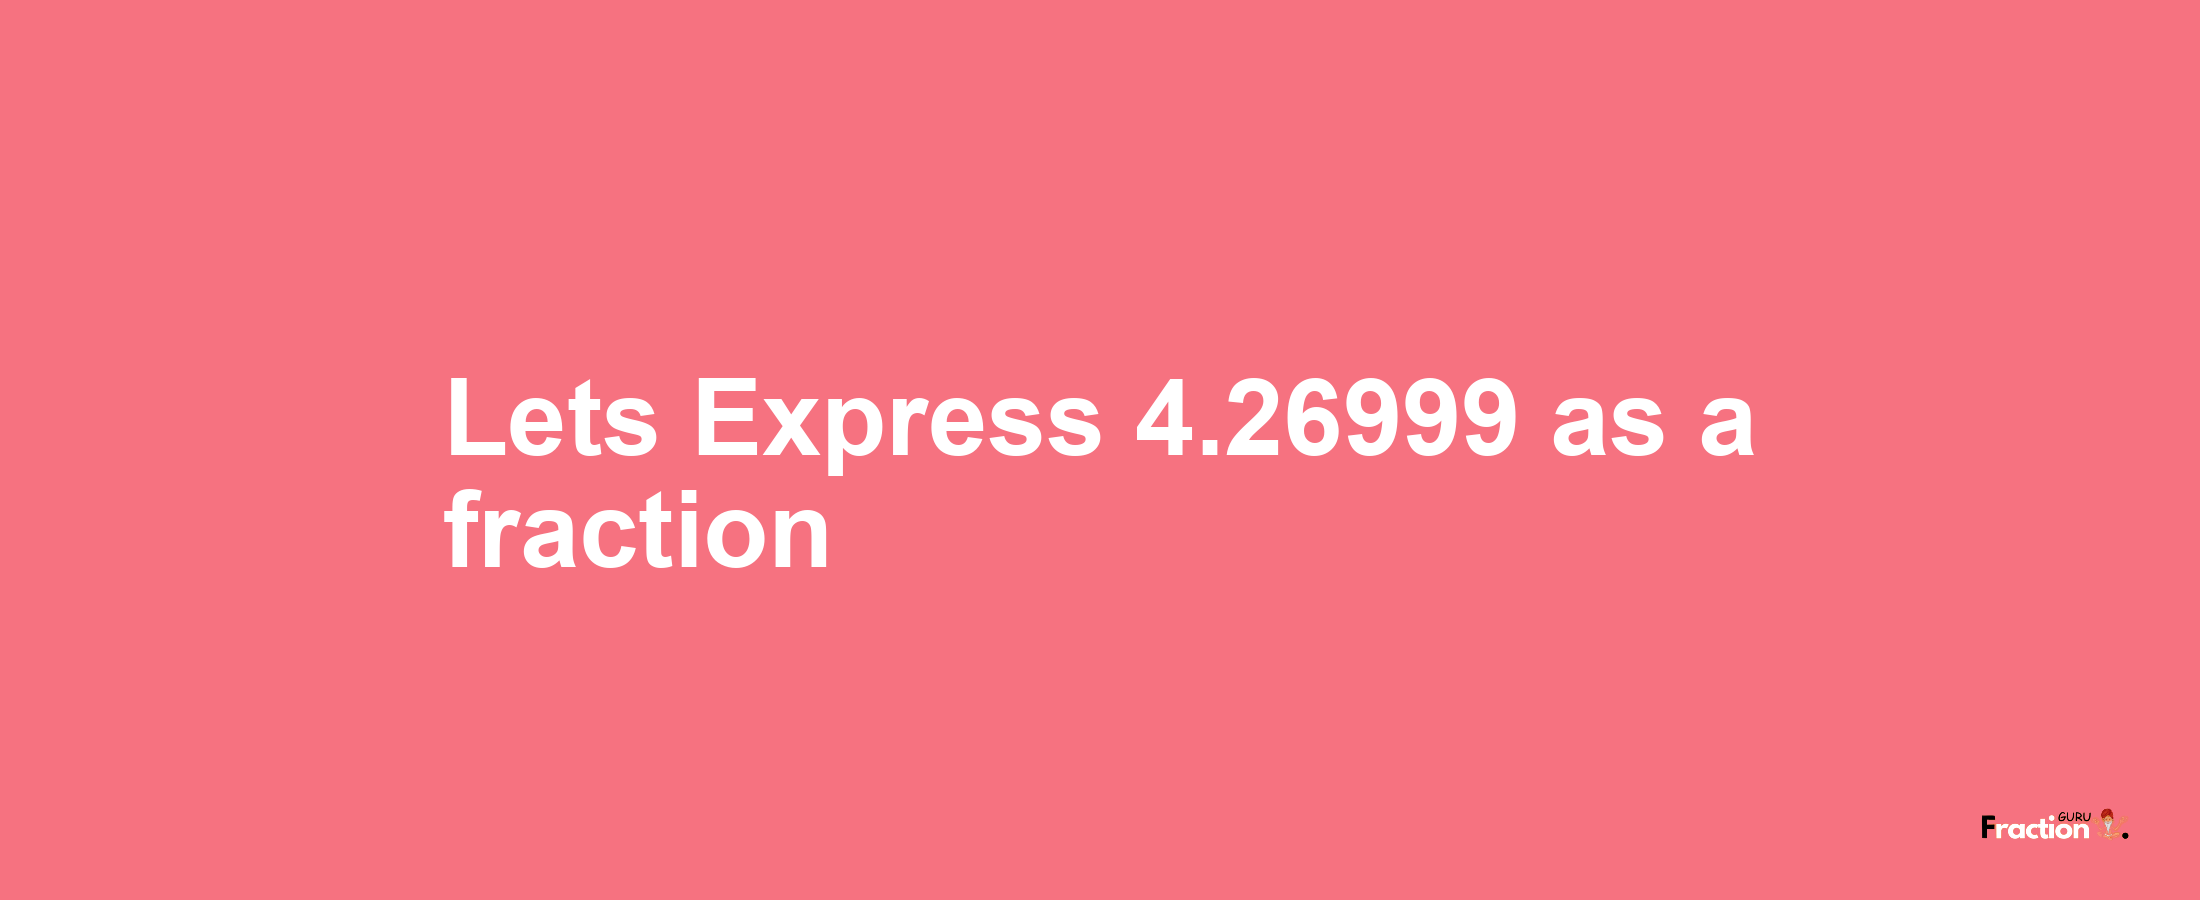 Lets Express 4.26999 as afraction